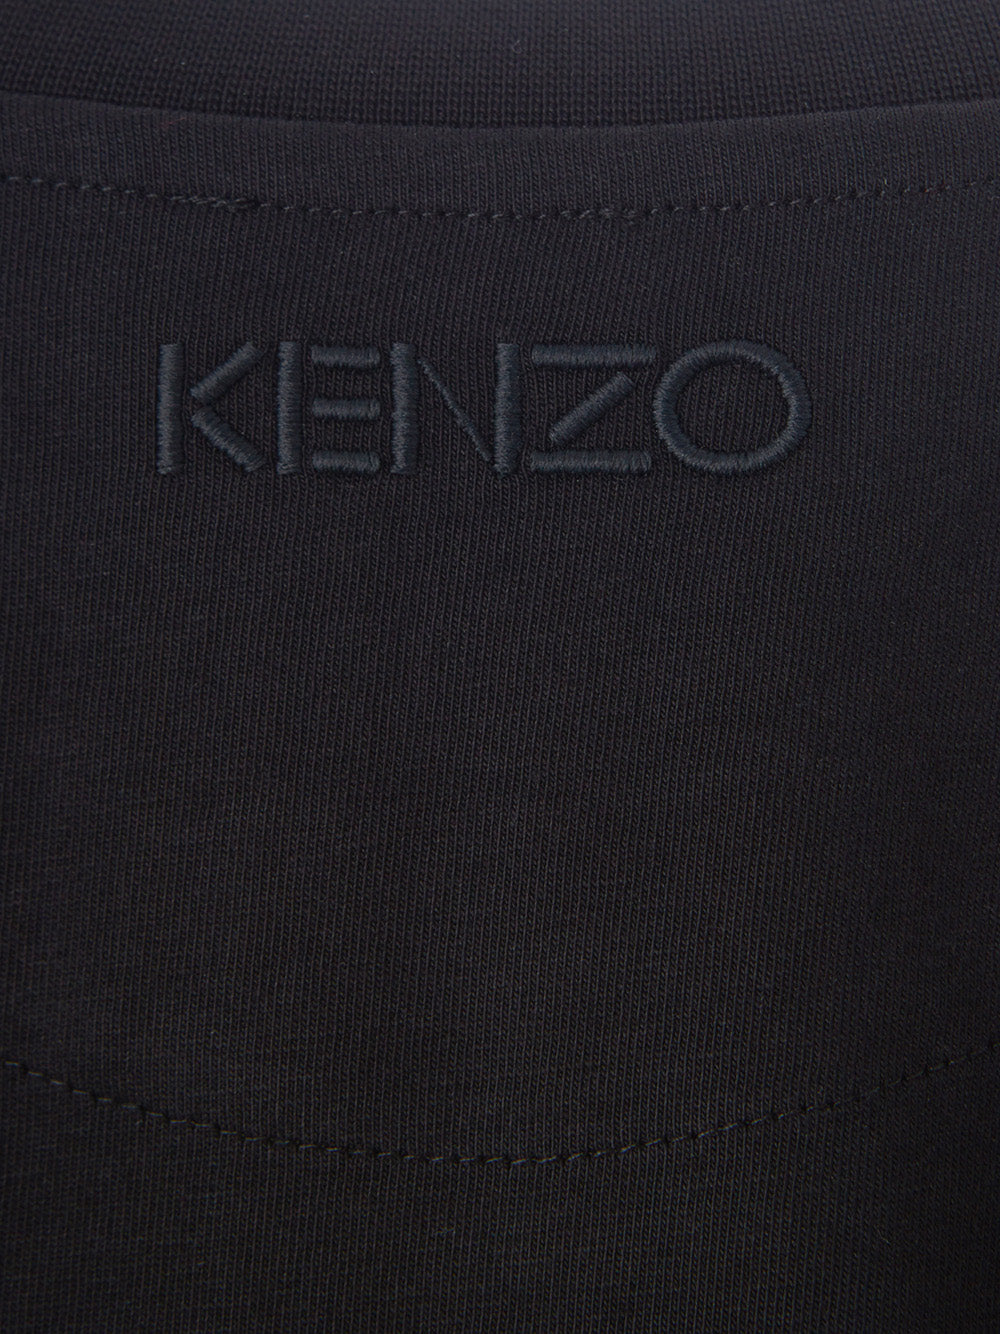 Kenzo T-Shirt with Flower Print